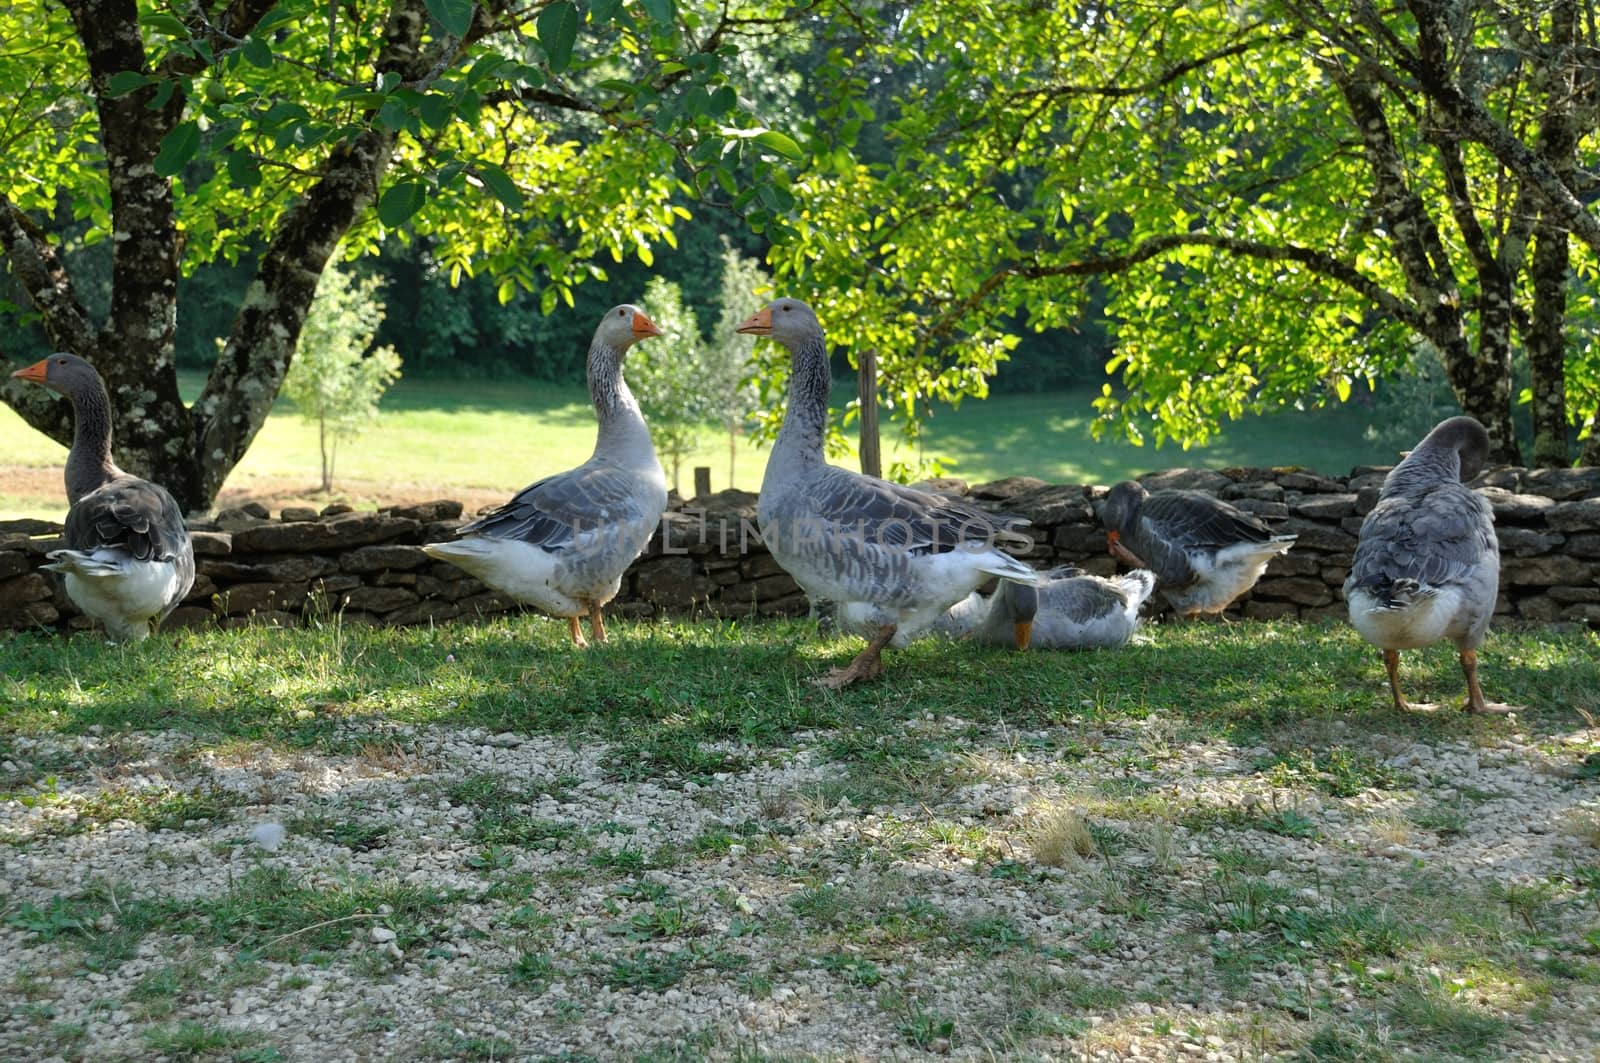 Farmed geese by BZH22